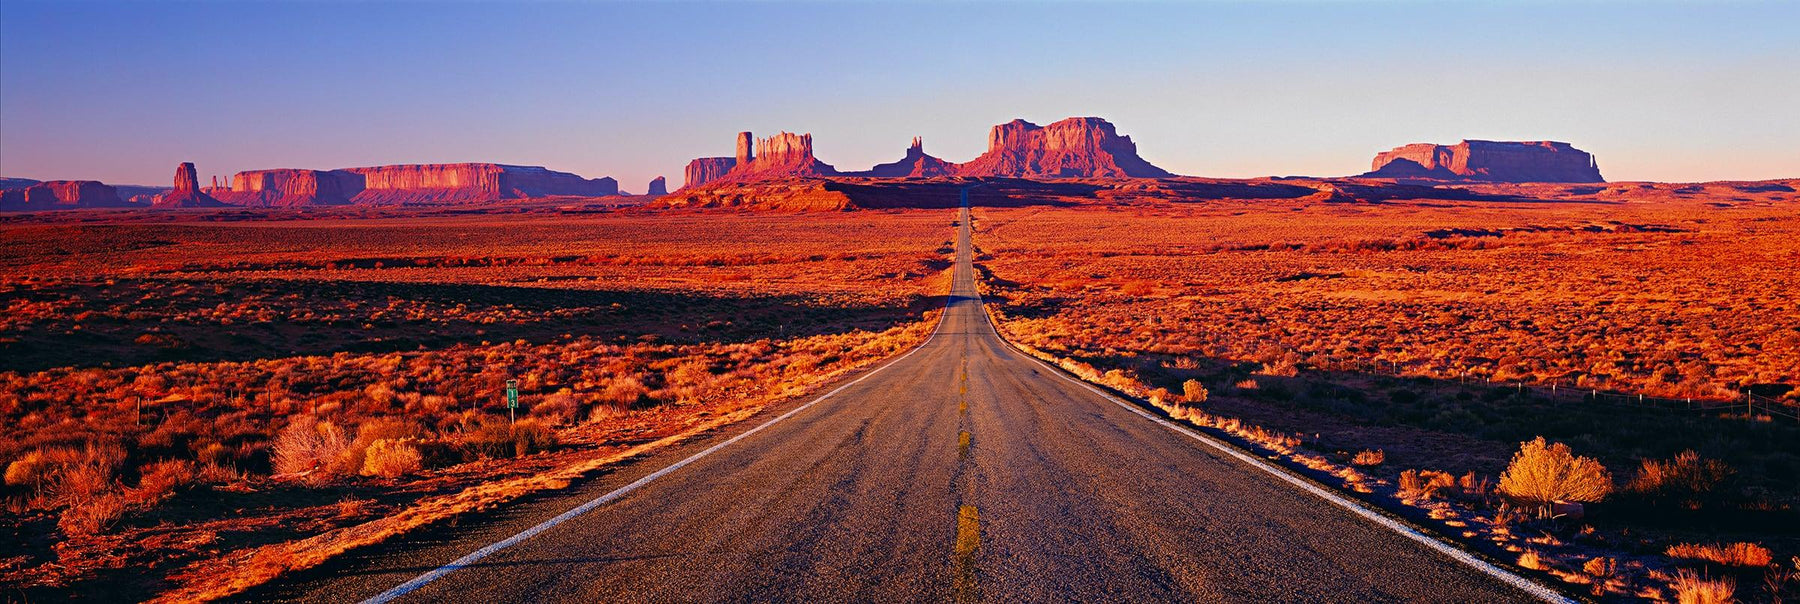 Looking straight down Highway 163 running into the sandstone buttes of Monument Valley Utah